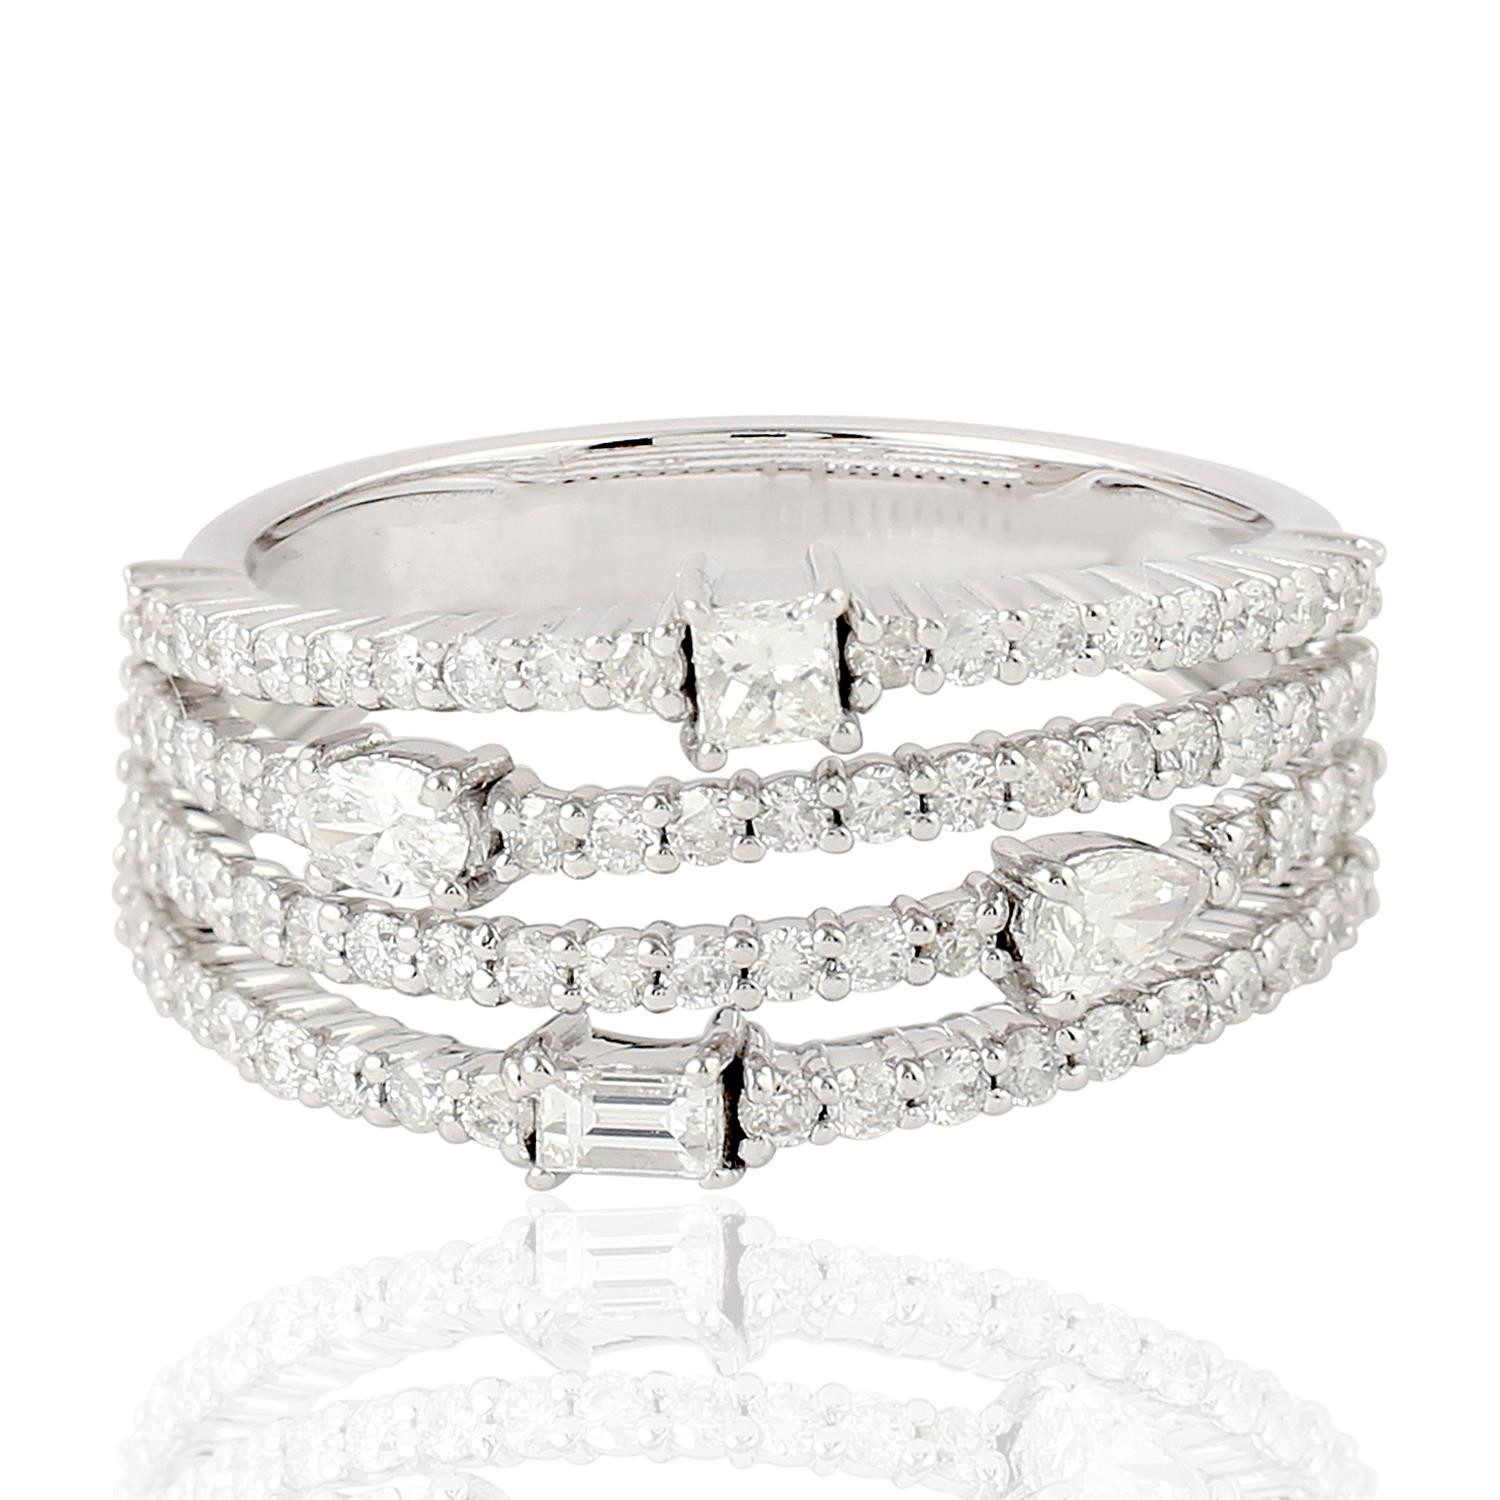 Mixed Cut Fancy Diamond Band Ring With Pave Diamonds Made In 18k White Gold For Sale